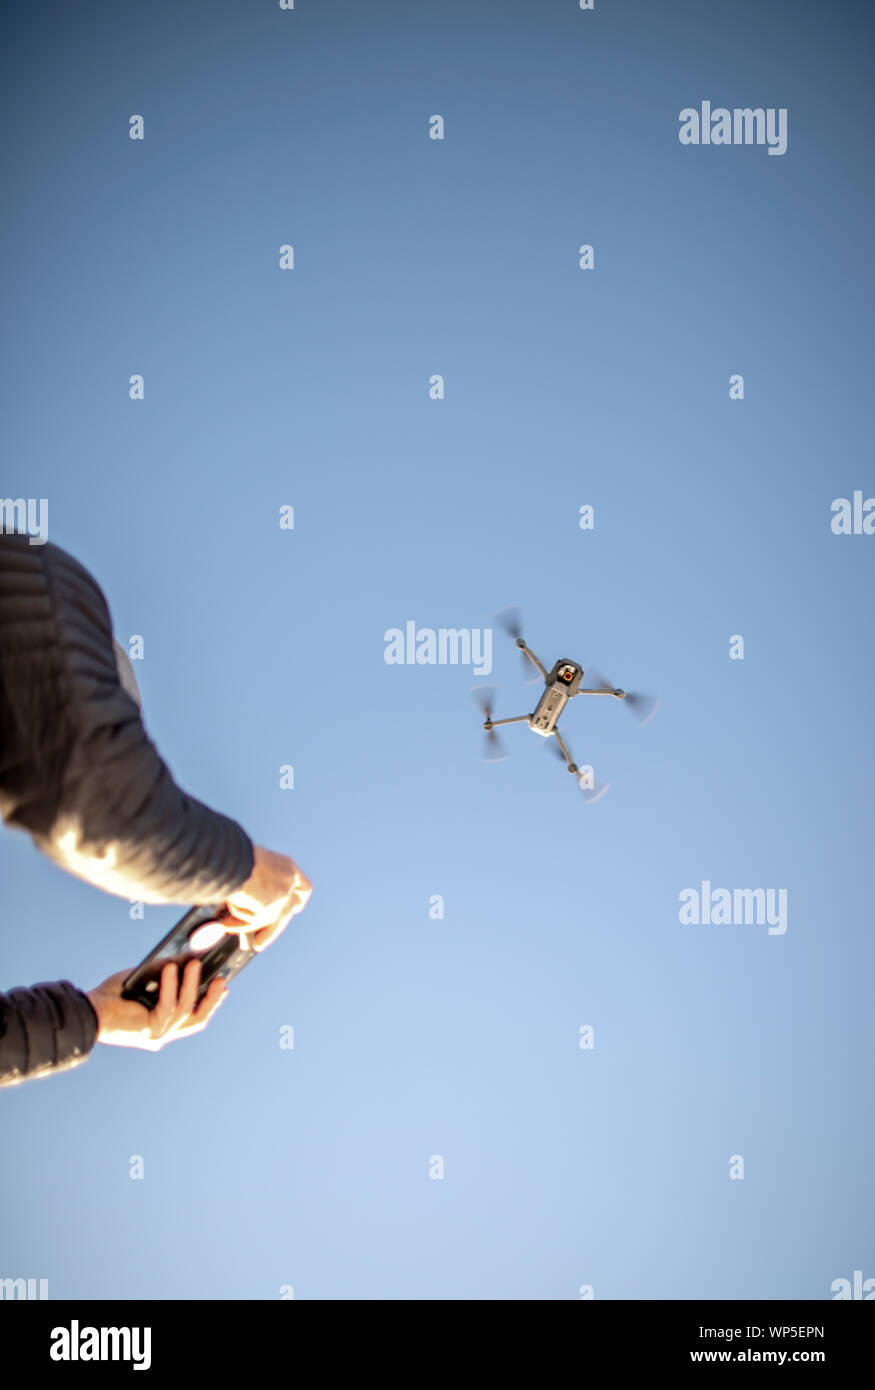 A drone and its remote control are seen against the blue sky. Stock Photo